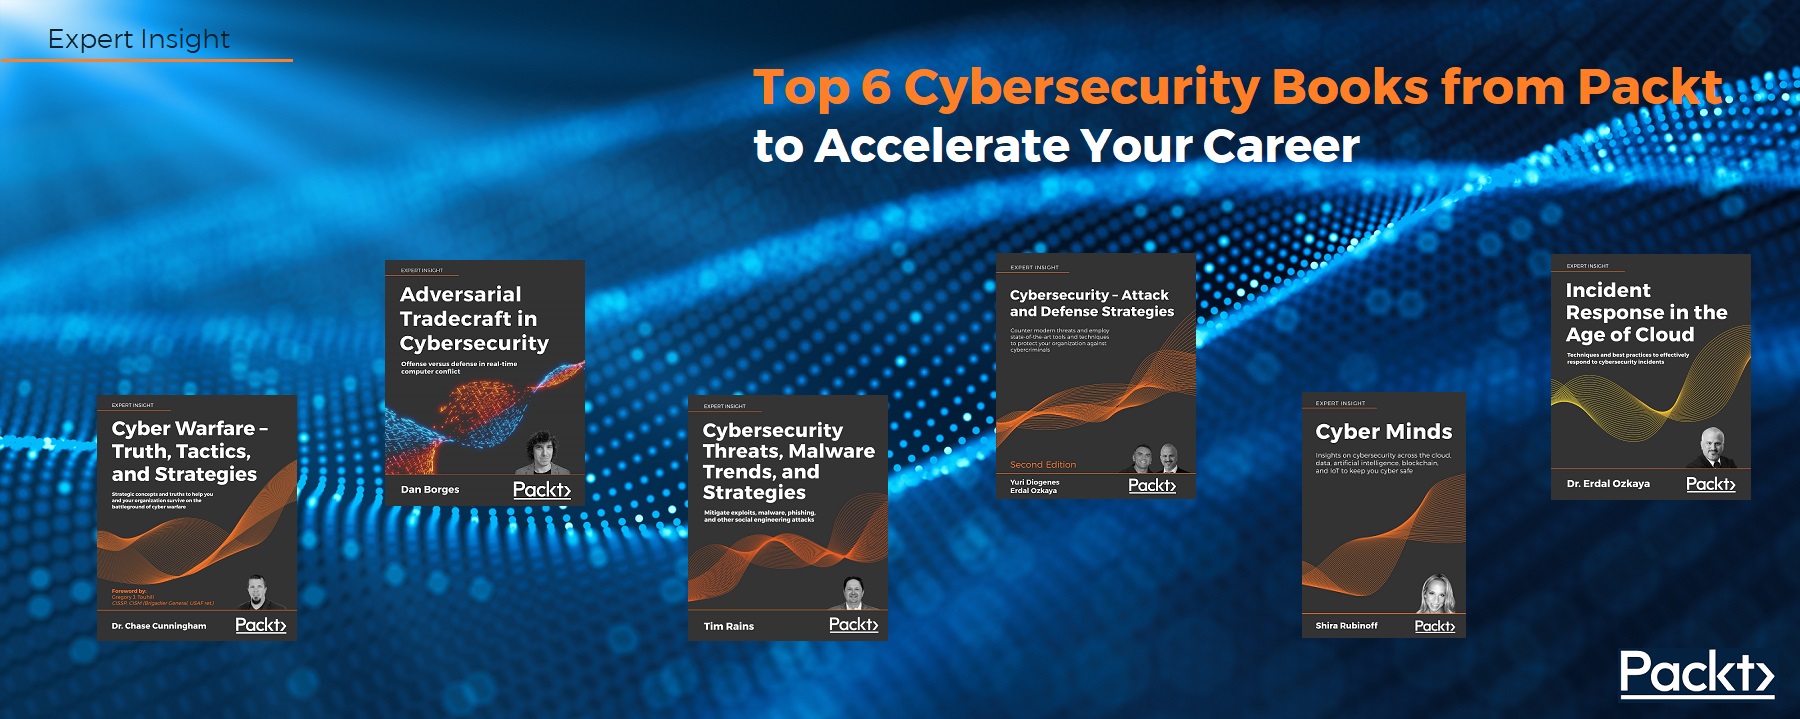 Top 6 Cybersecurity Books from Packt to Accelerate Your Career